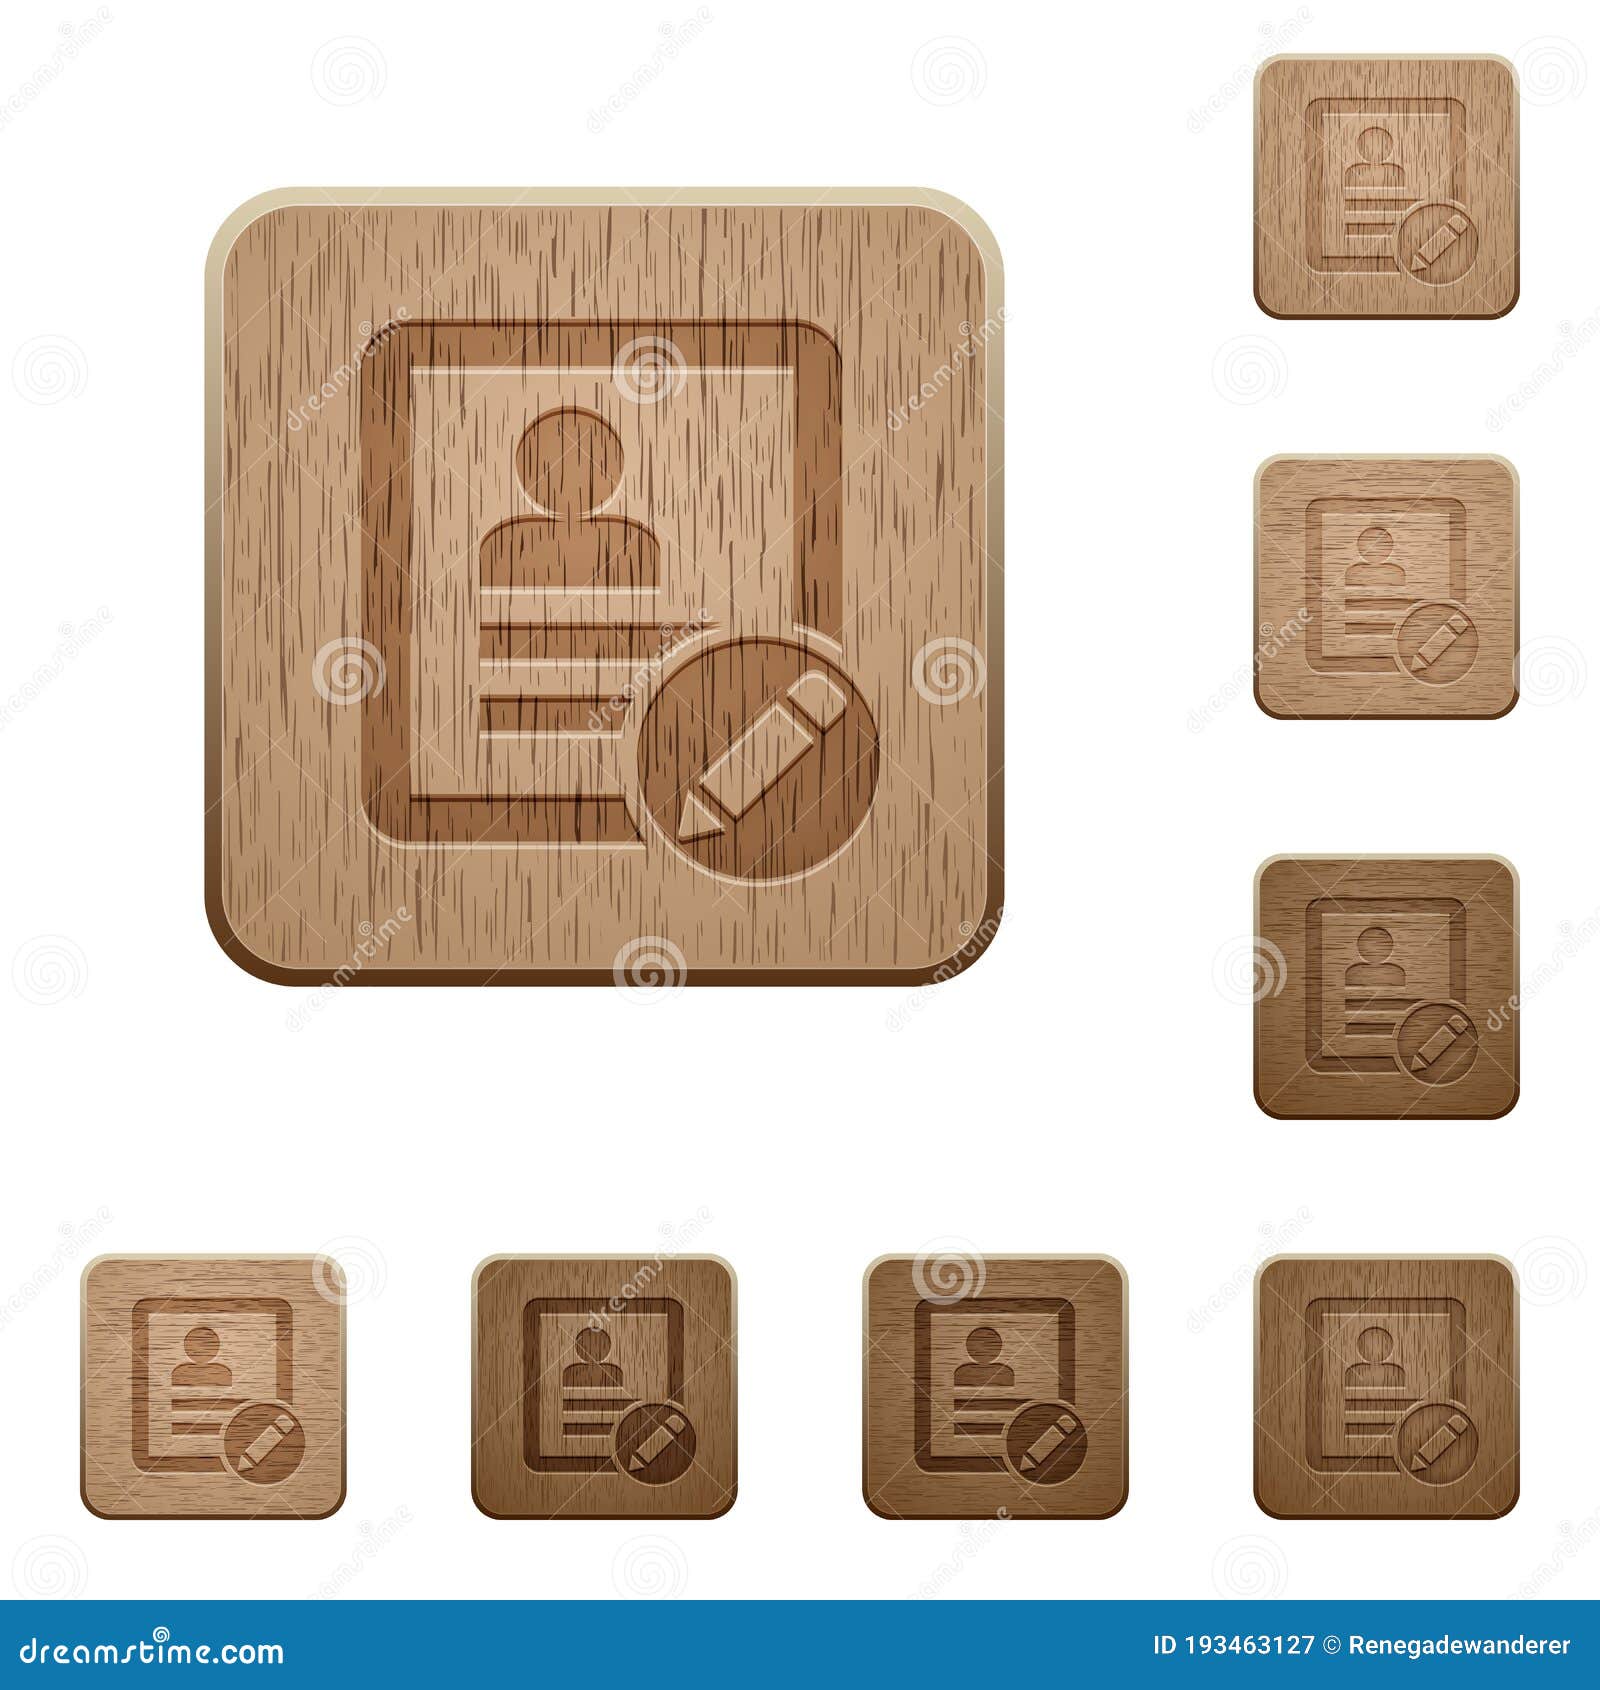 rename contact wooden buttons